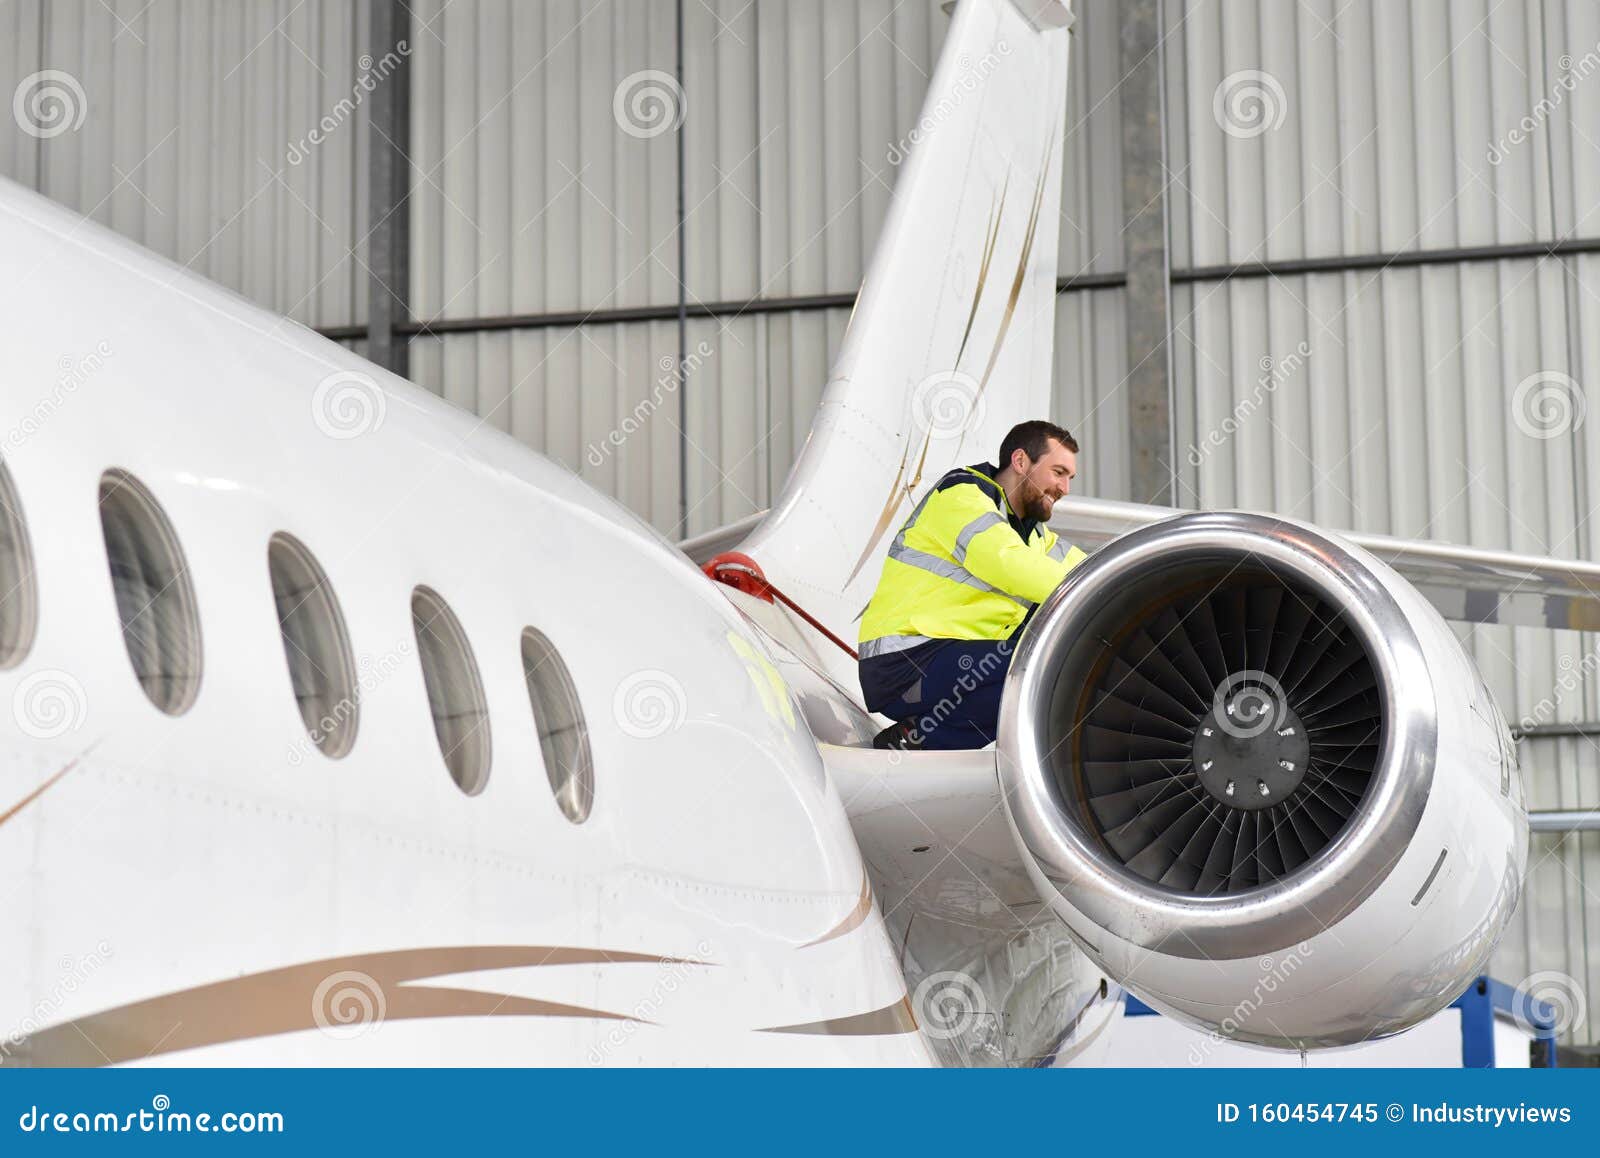 aircraft mechanic inspects and checks the technology of a jet in a hangar at the airport